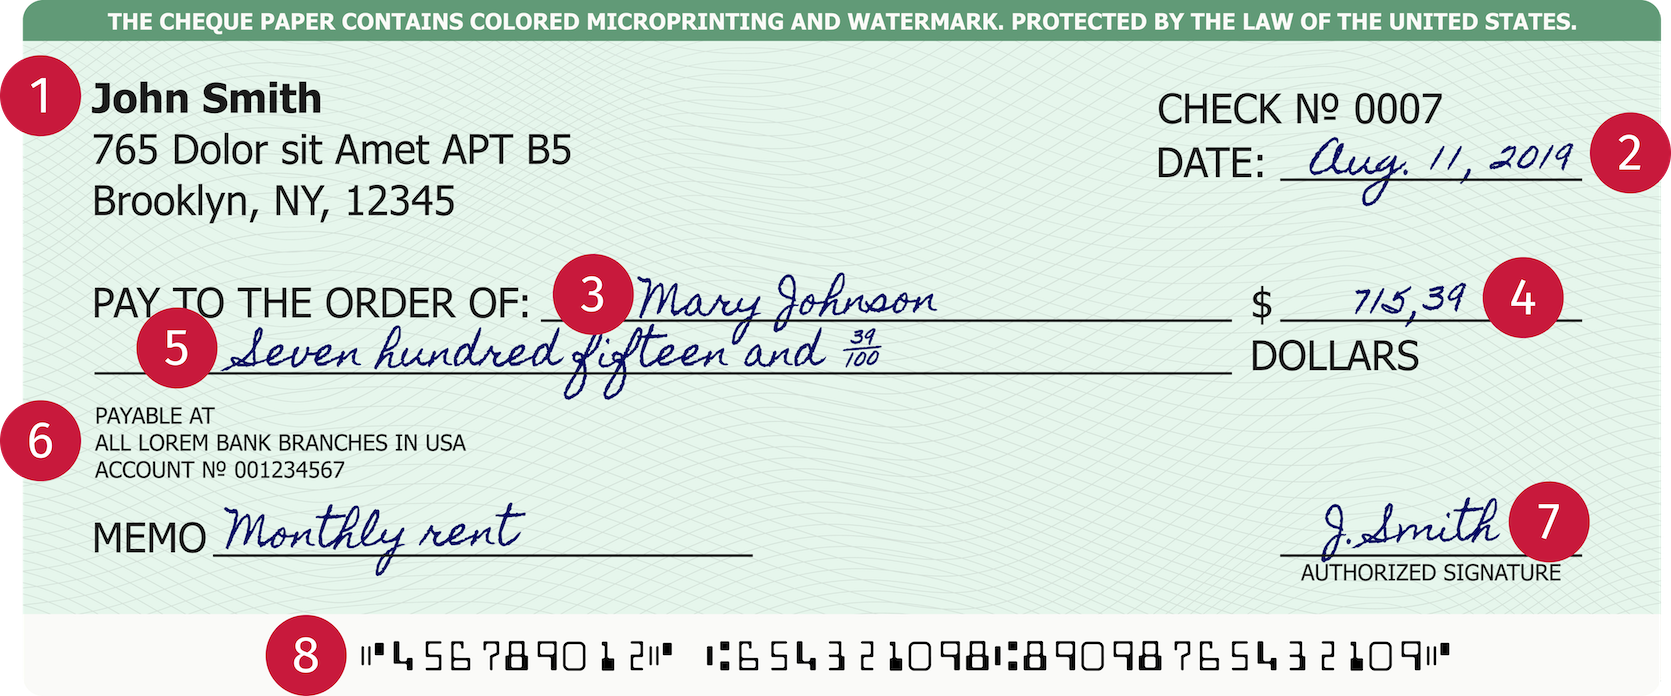 Information found on a check